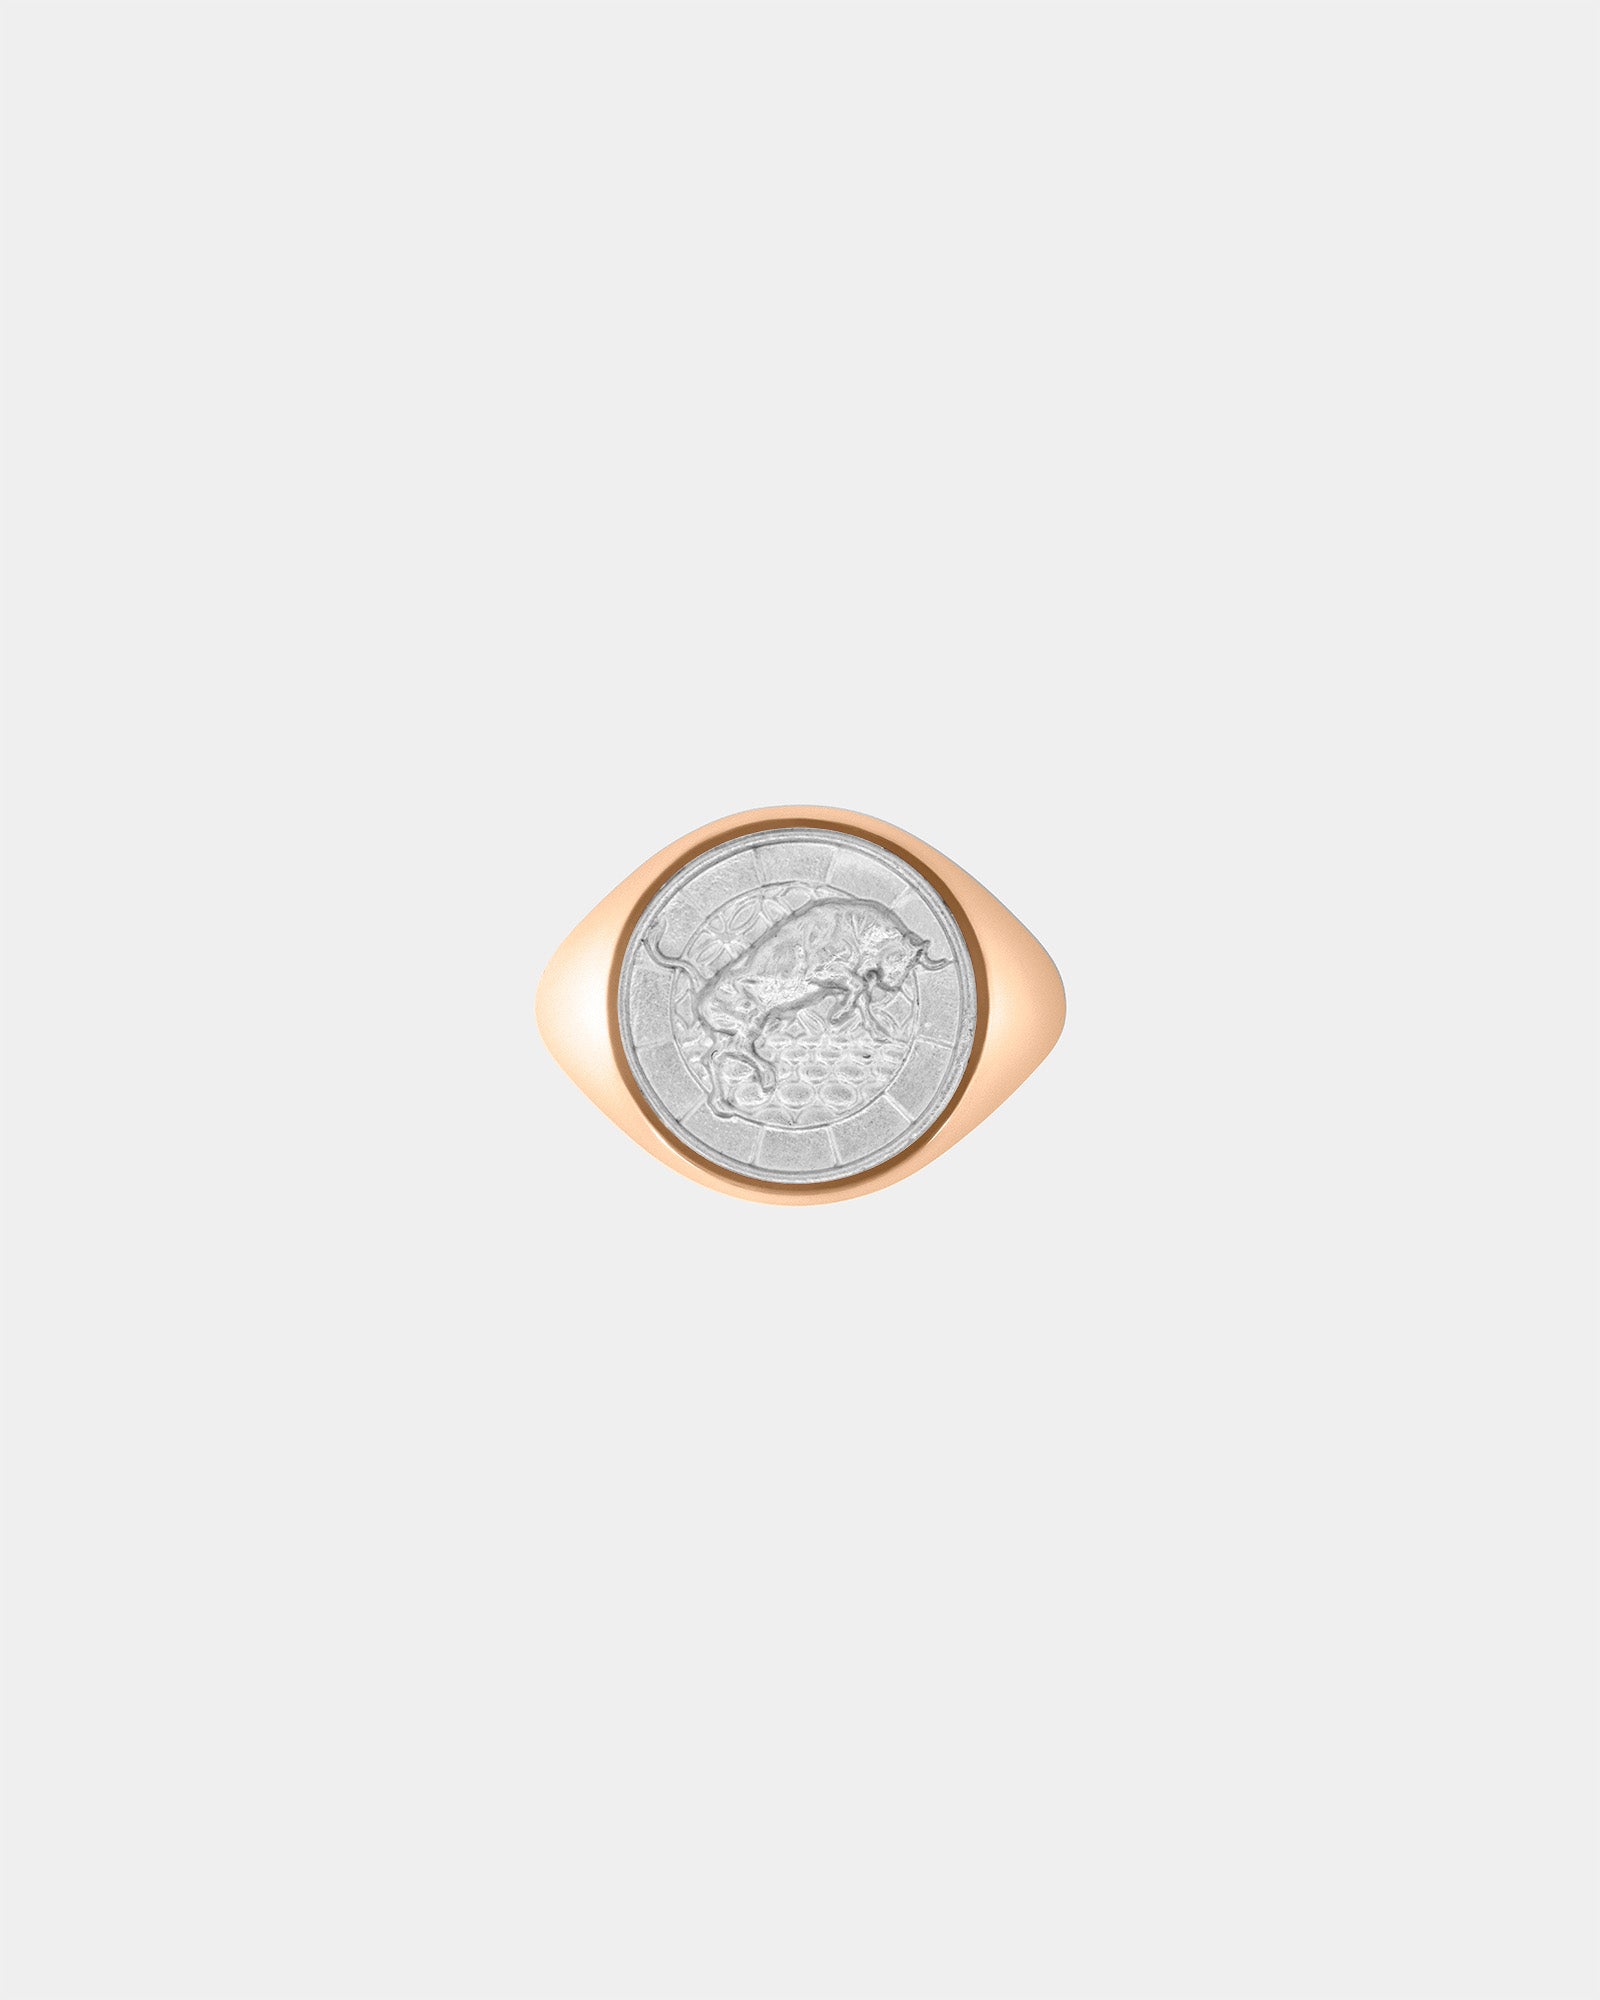 The Bull Large Signet Ring in 9k Rose Gold / Sterling Silver by Wilson Grant